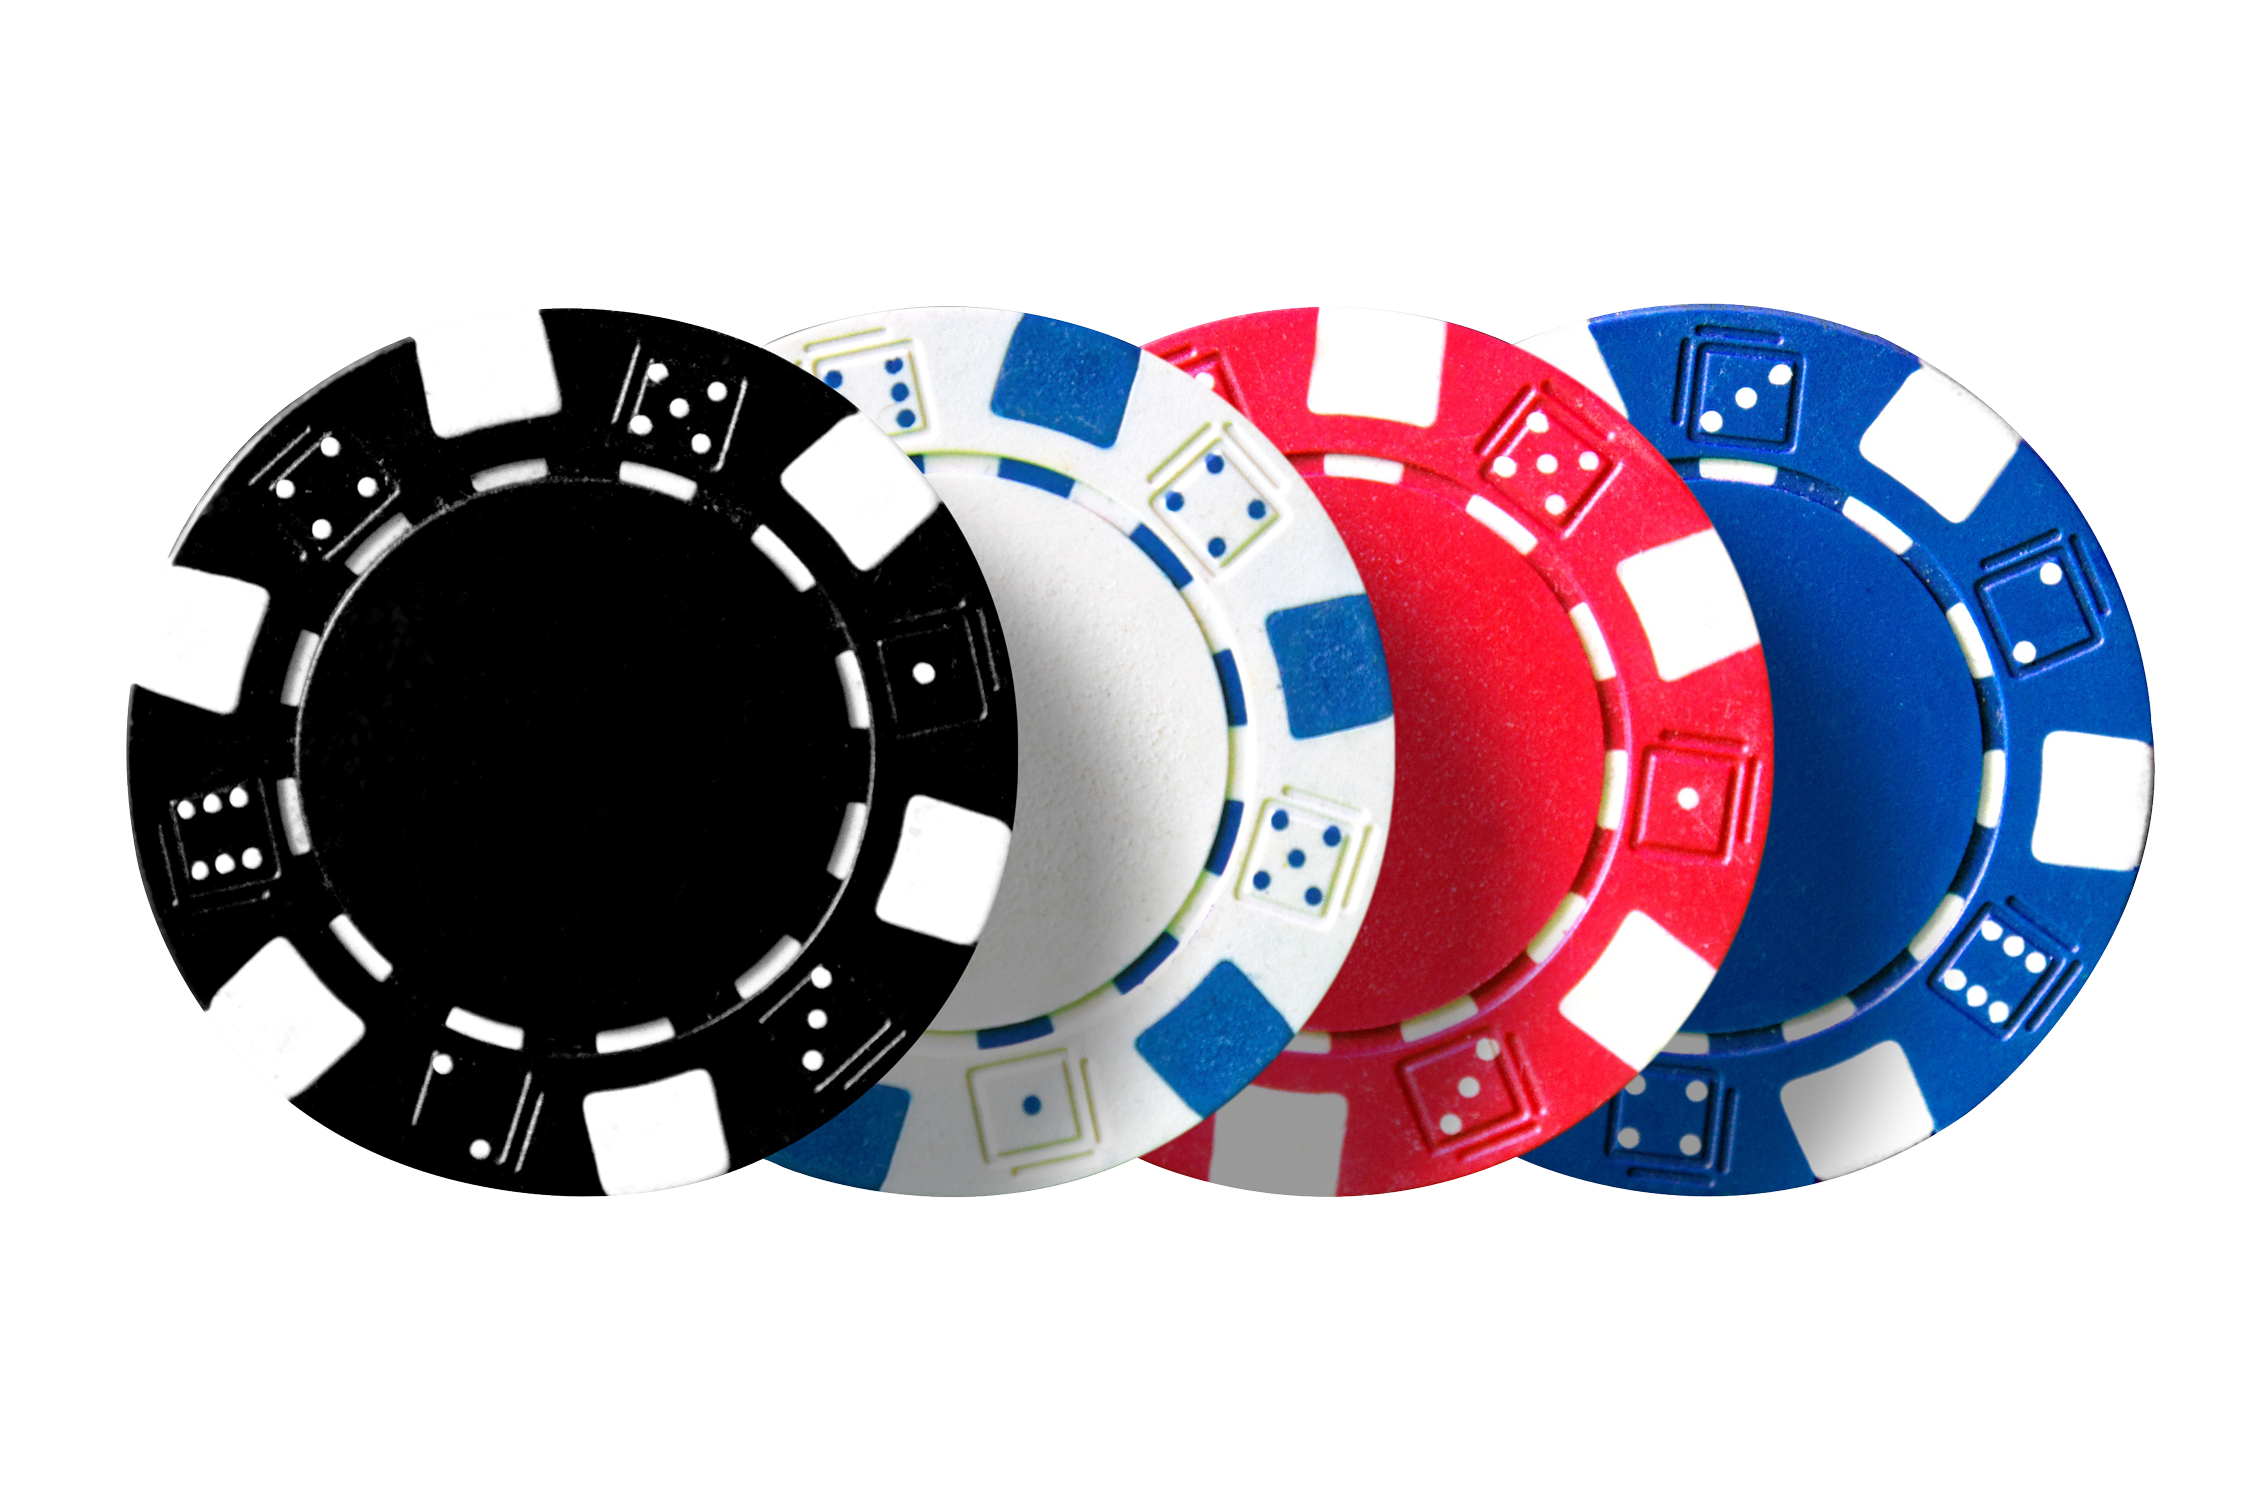 Poker Chip Stock Photos Images. Royalty Free Poker Chip Images And ...